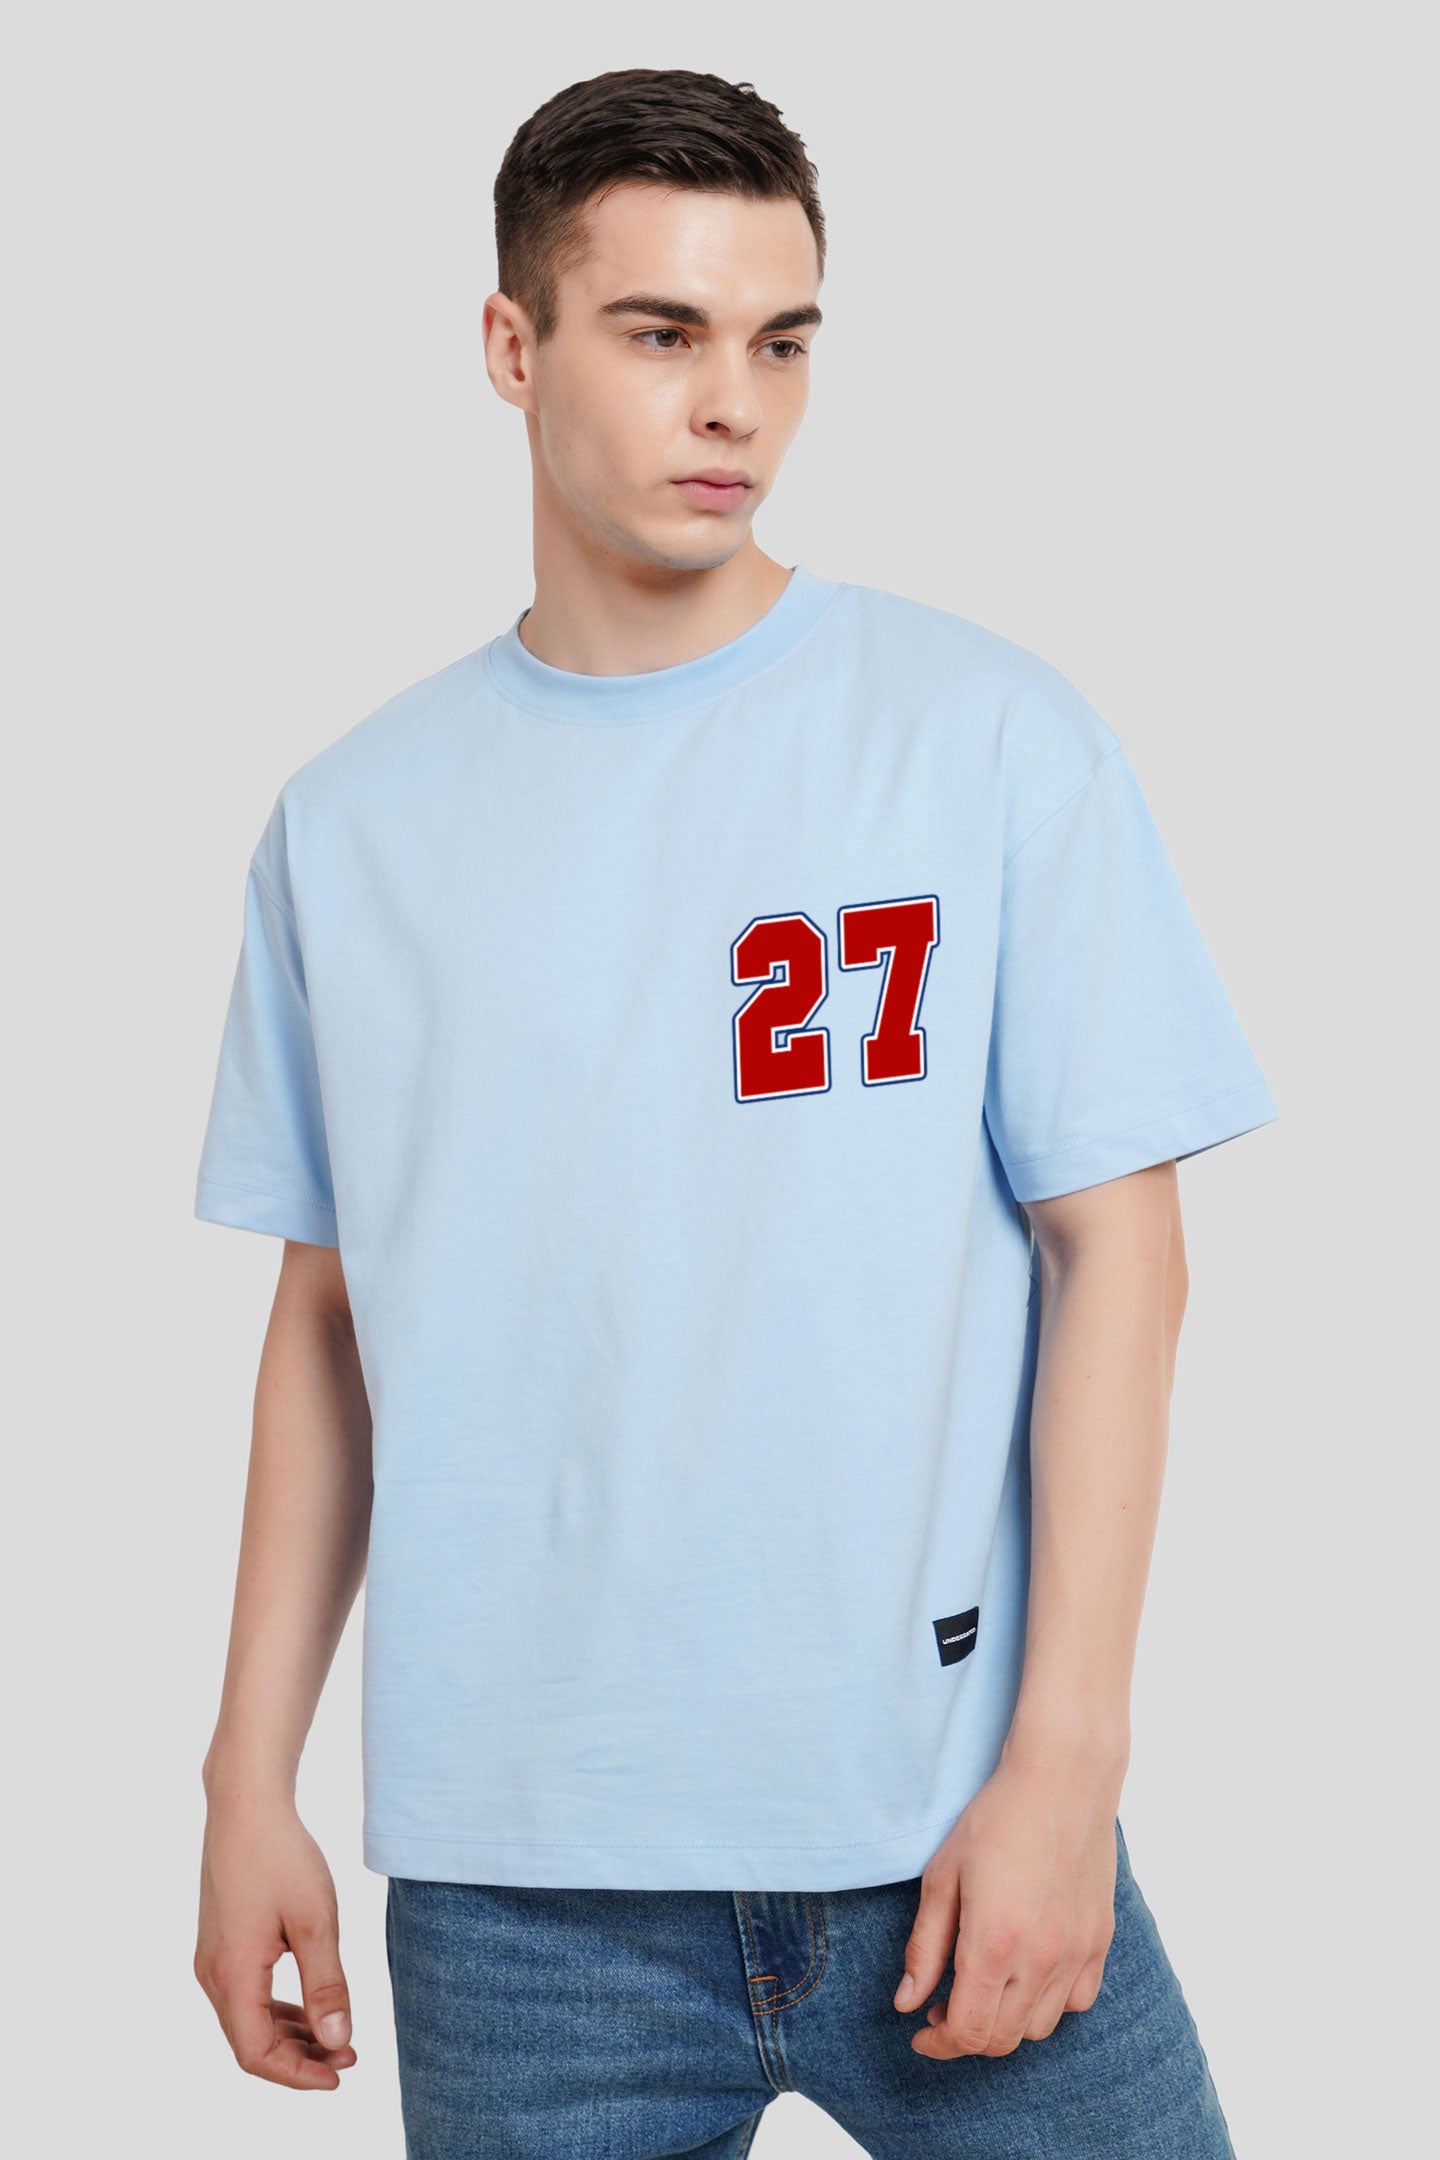 27 Powder Blue Printed T Shirt Men Oversized Fit With Front And Back Design Pic 1